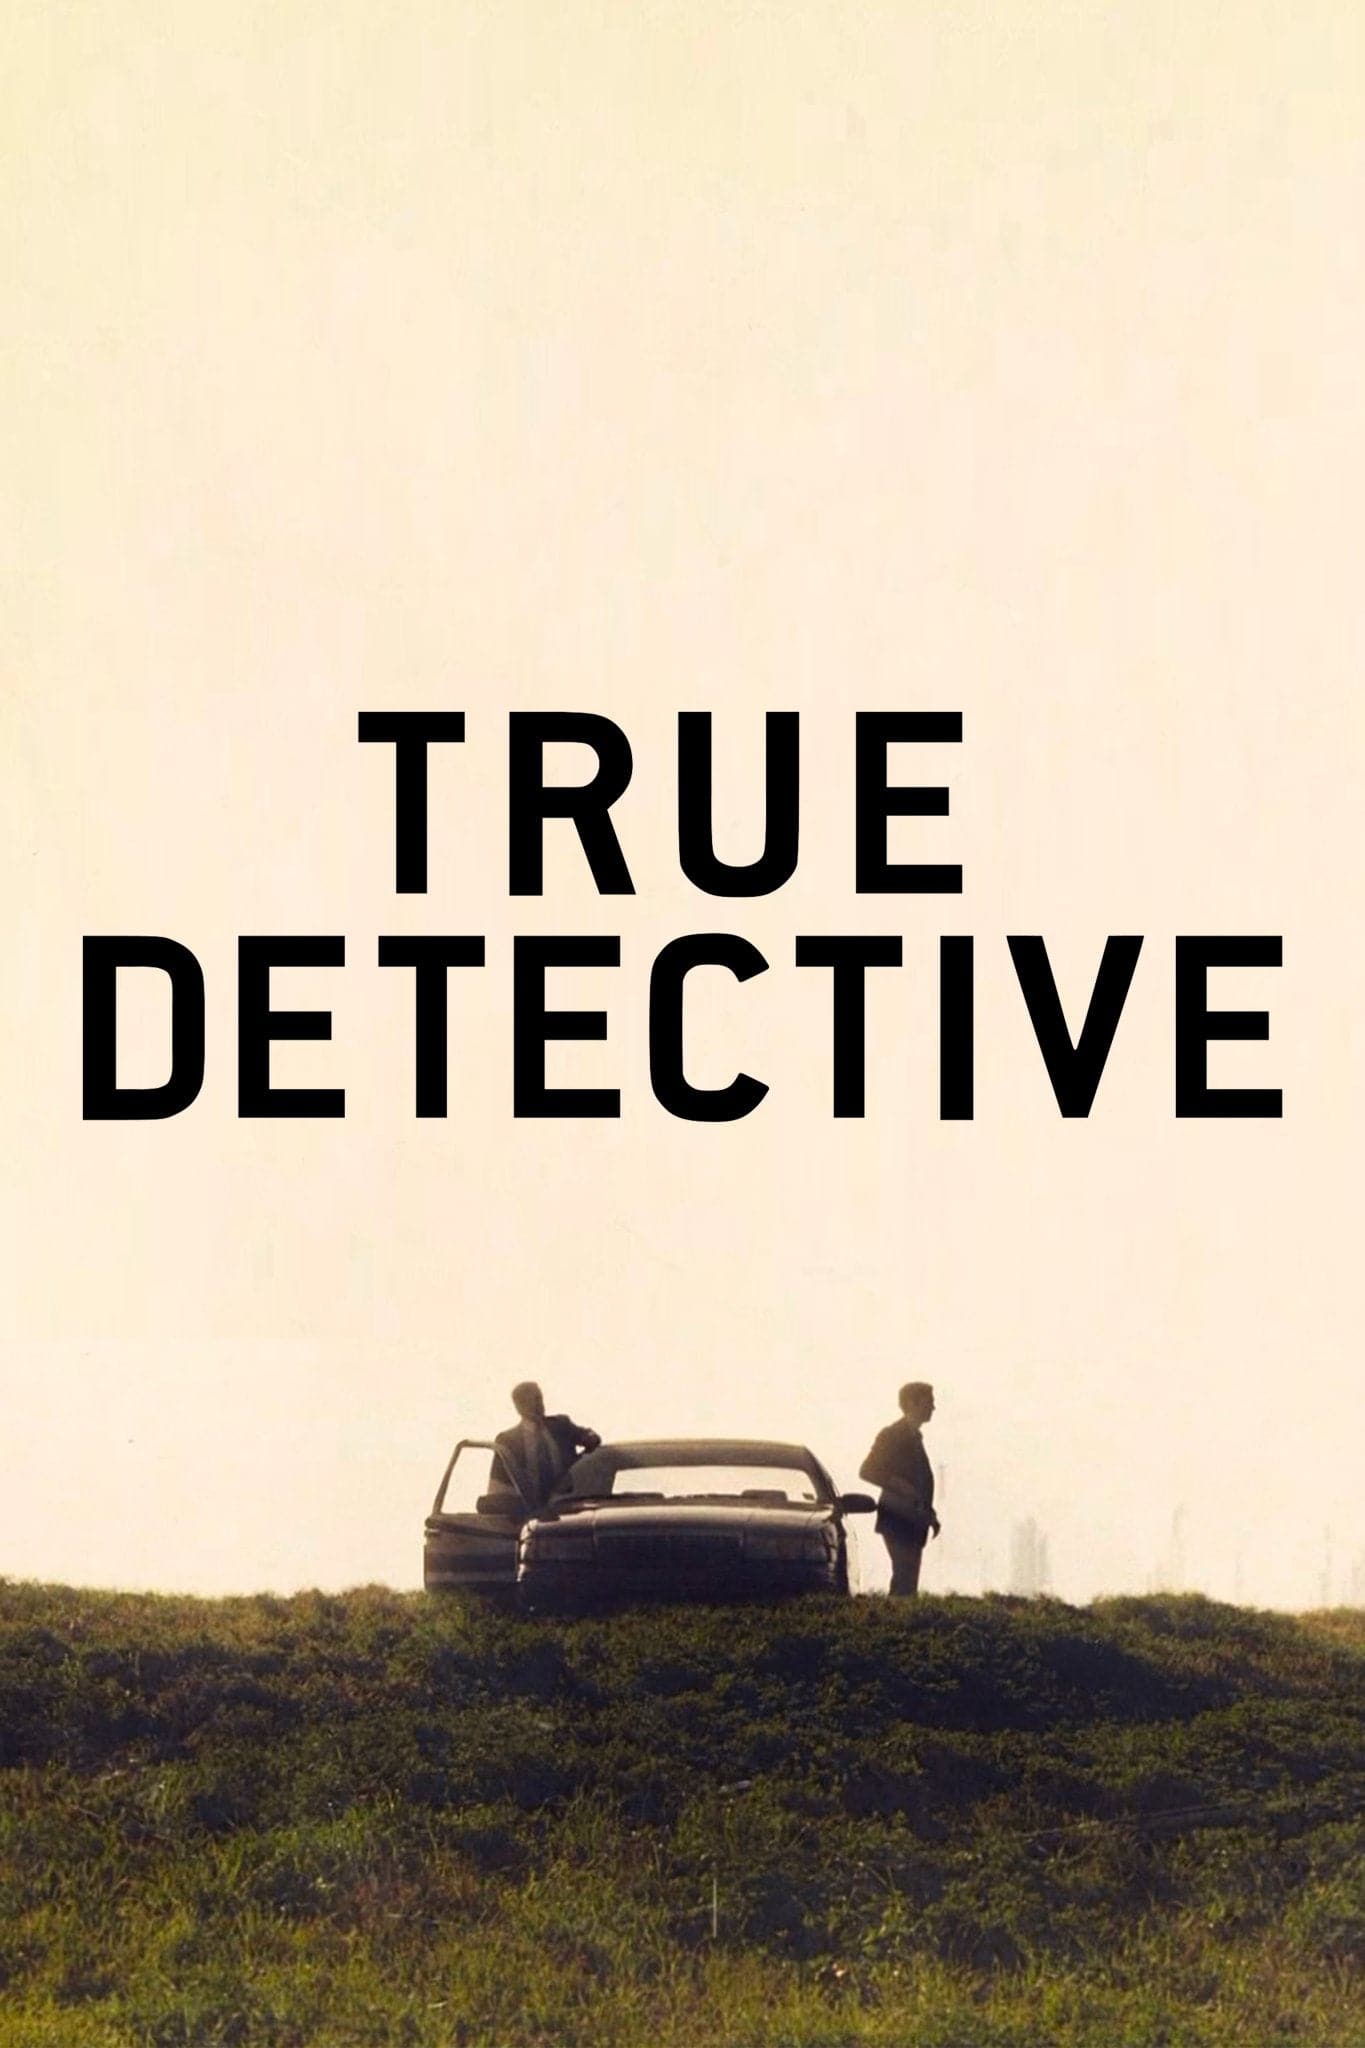 True Detective ‘First Duo’ Poster - Posters Plug